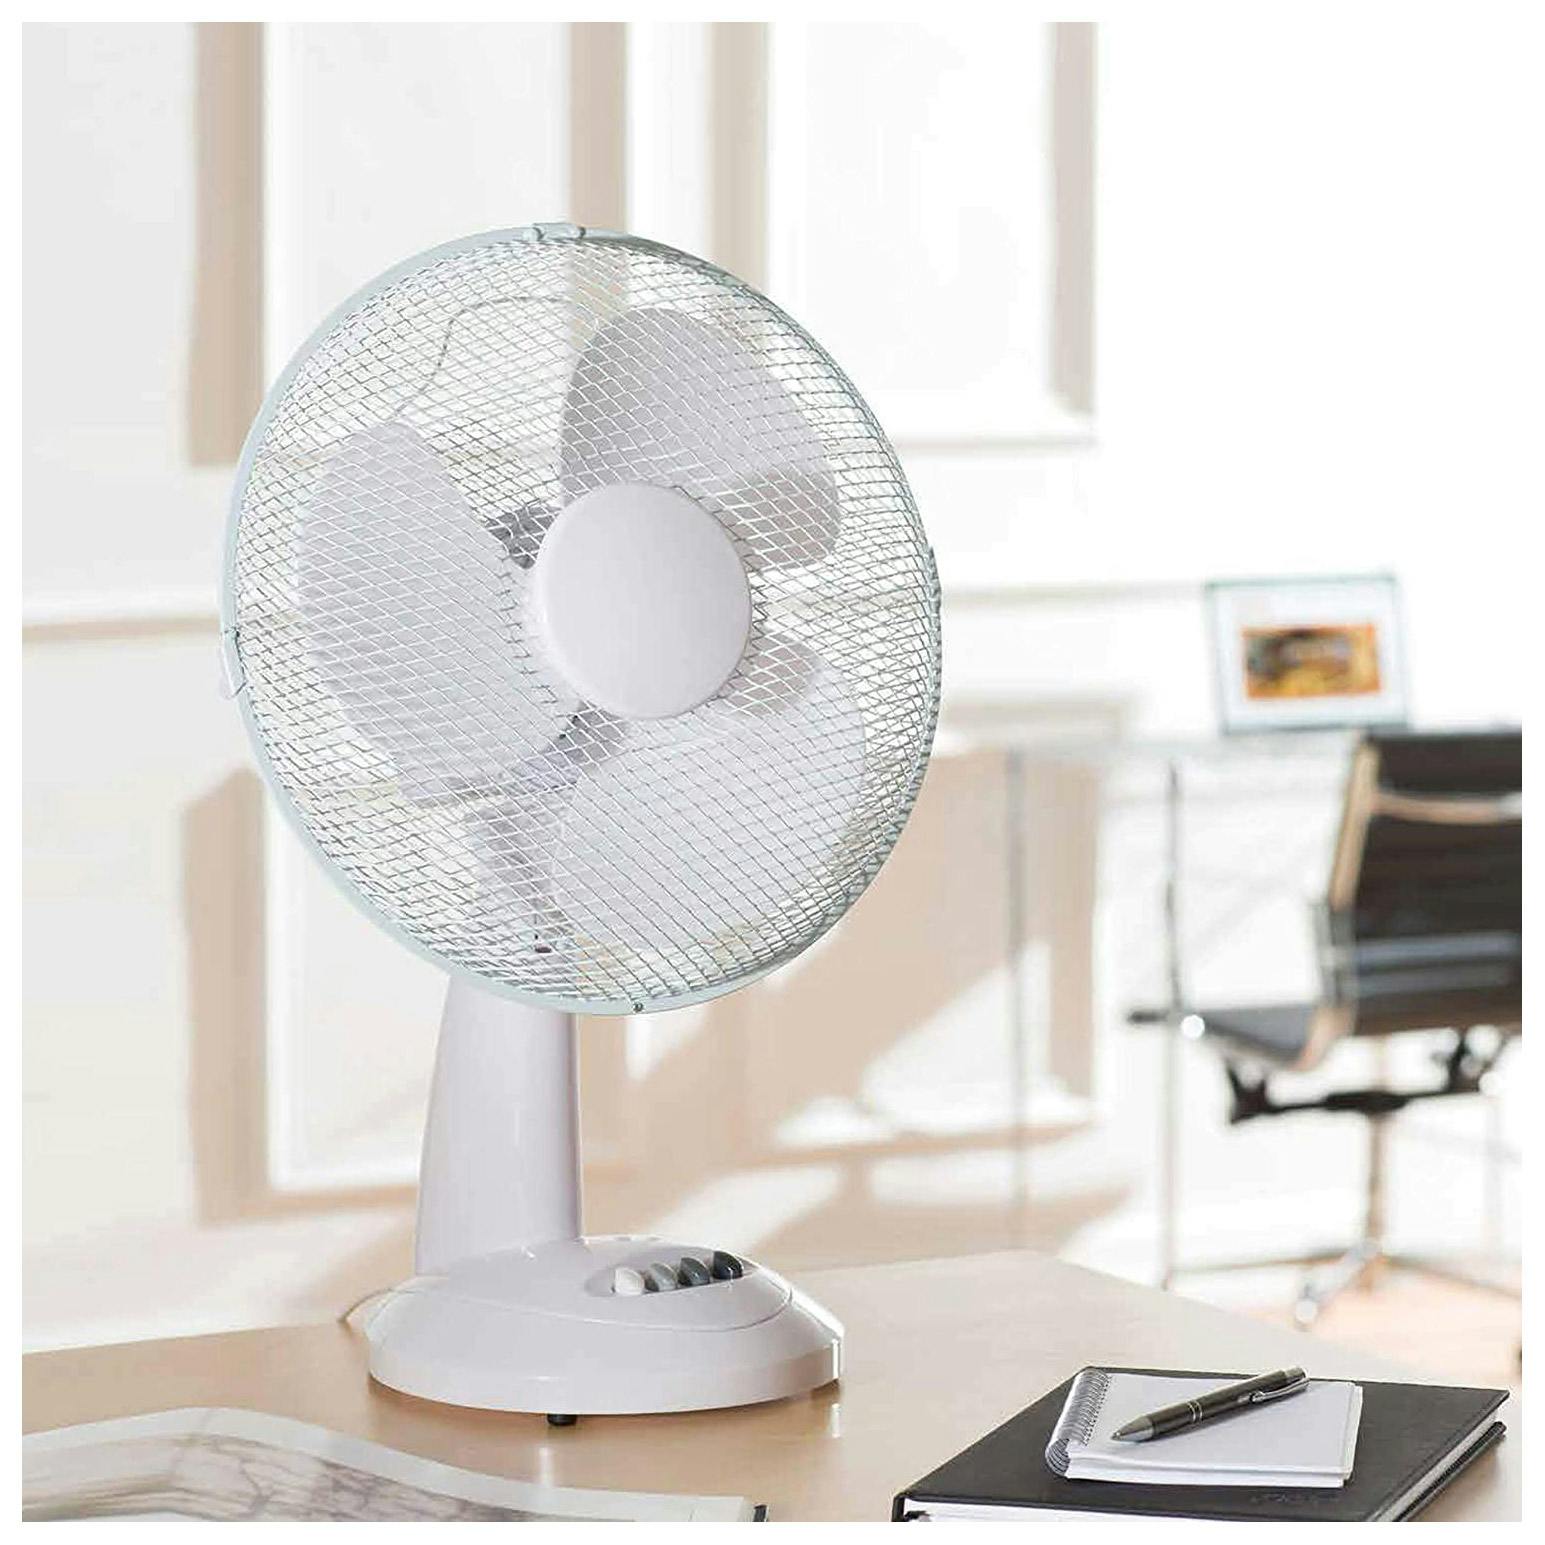 3 Speed Settings Sturdy Base One Size Easy-to-Use Key Switch Portable Fan for Home or Small Office Fine Elements COL1252 16-Inch Stand Ideal Cooling System-White 